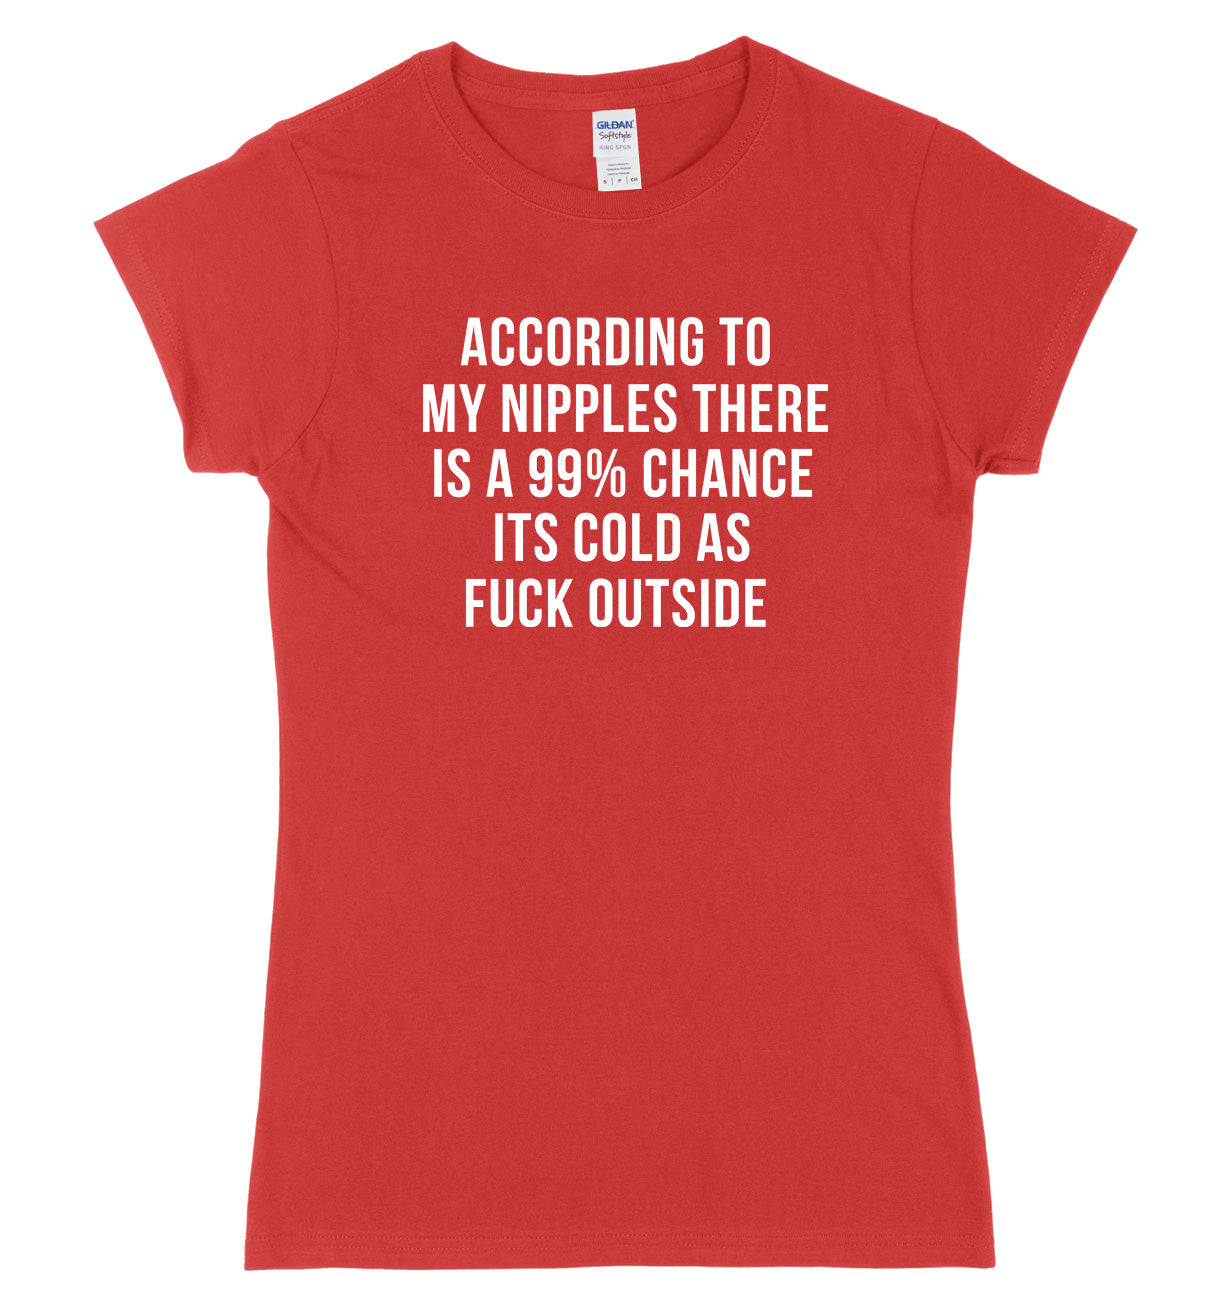 According To My Nipples There Is A 99% Chance It's Cold Outside Womens Ladies Slim Fit T-Shirt